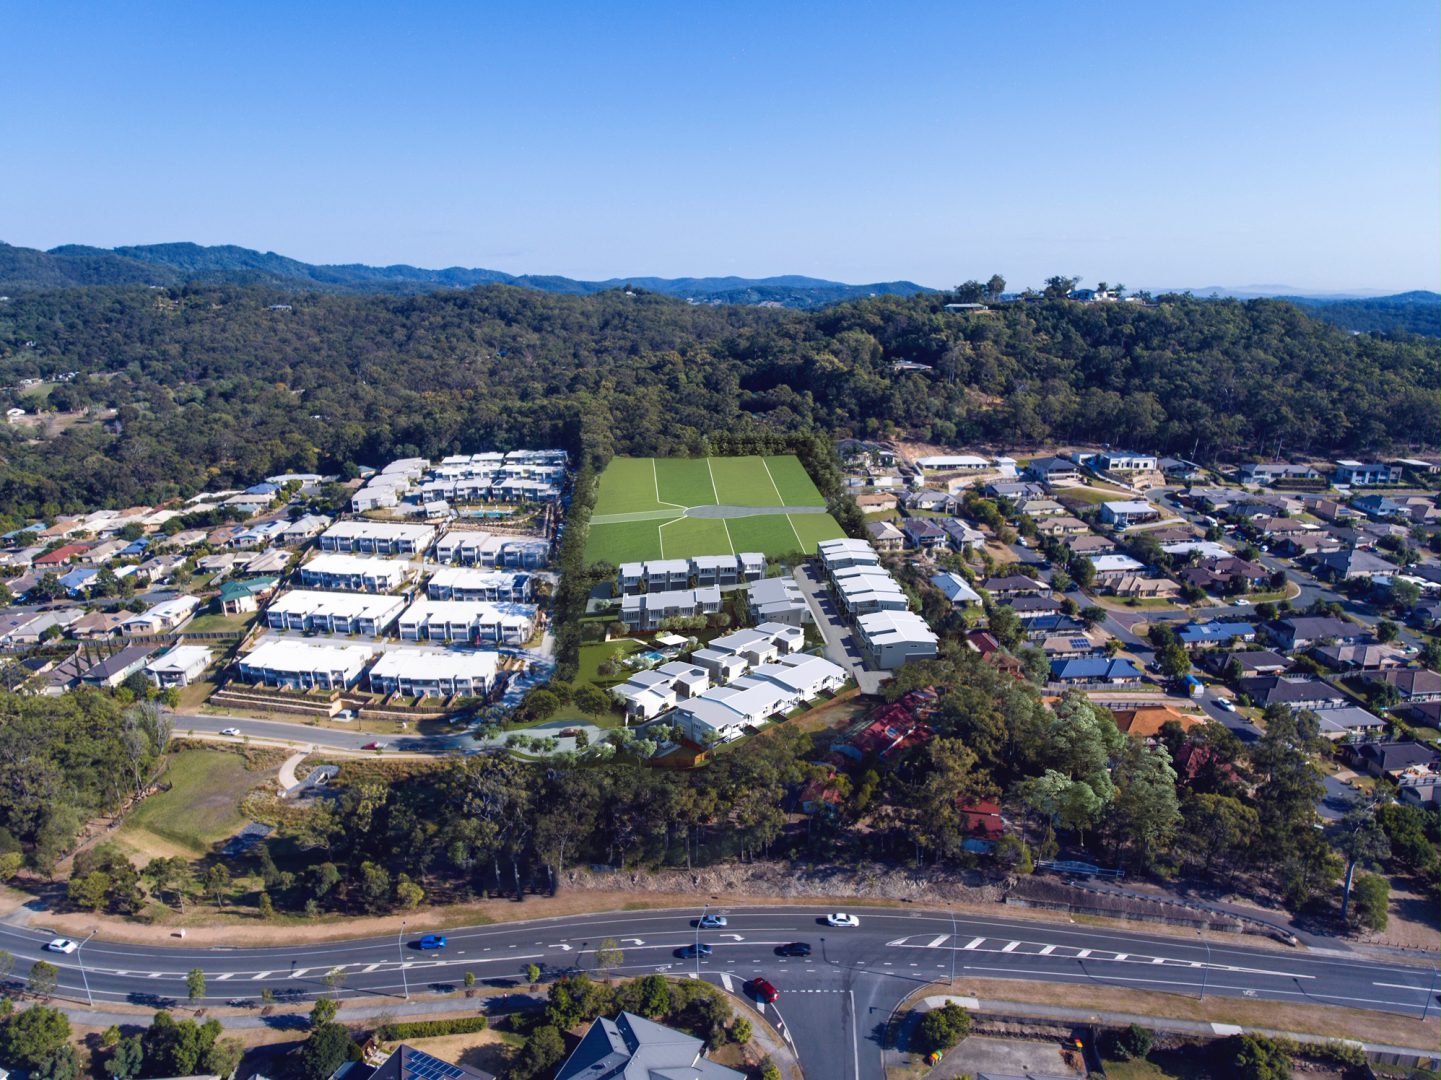 The Clarence Development site location and overview